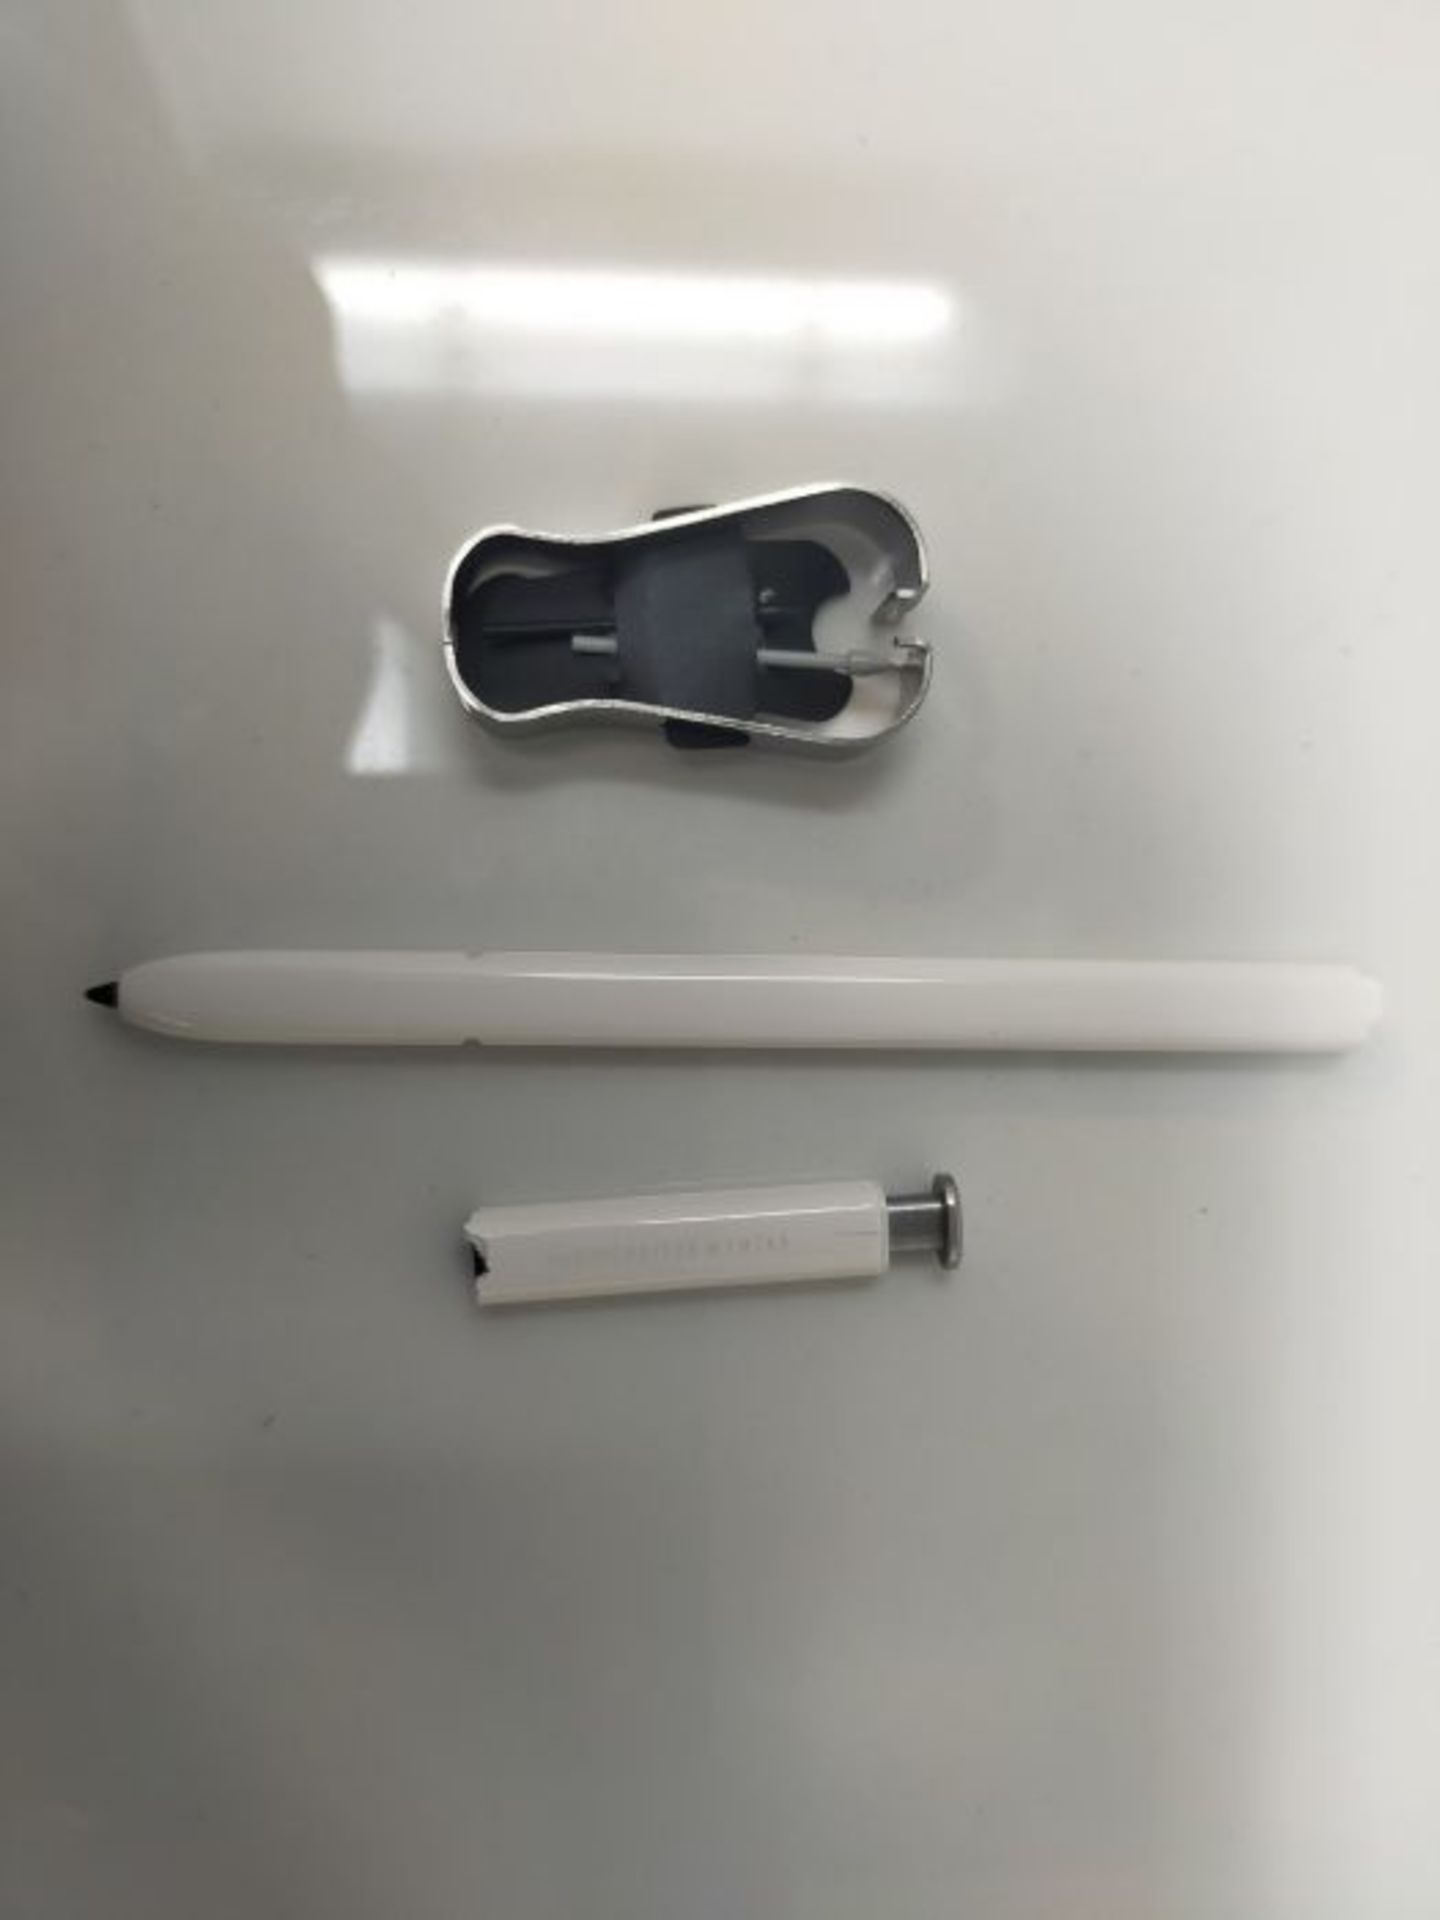 [CRACKED] Samsung Note20 Series S Pen, Mystic White - Image 2 of 3